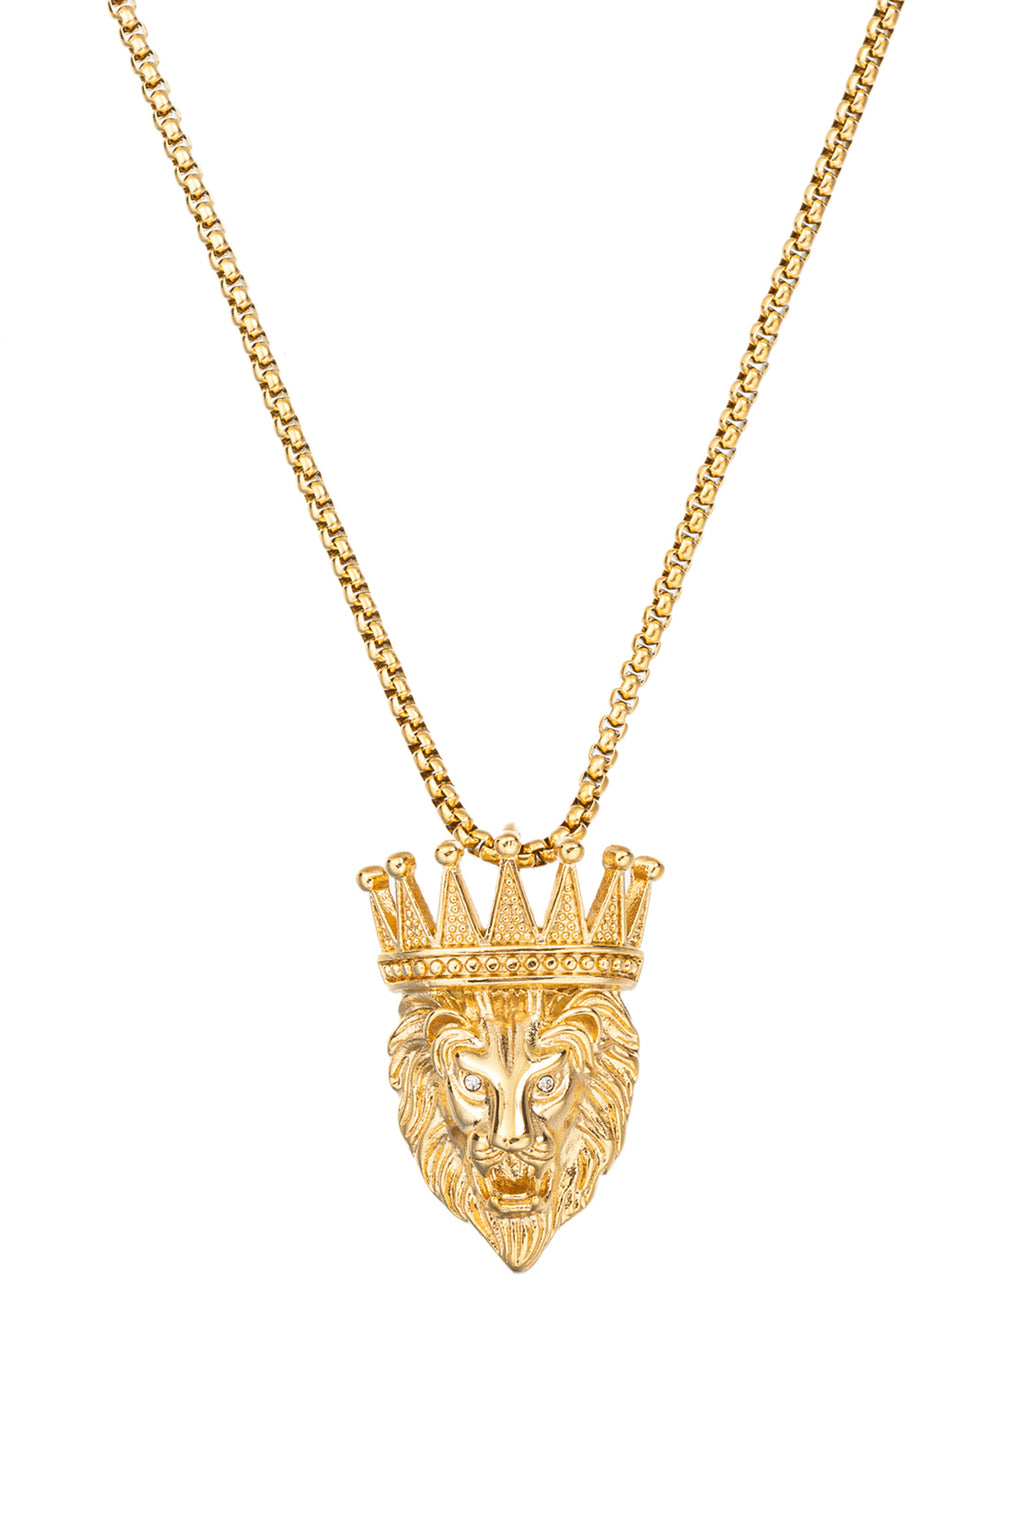 Women's Python Necklace – Eye Candy Los Angeles